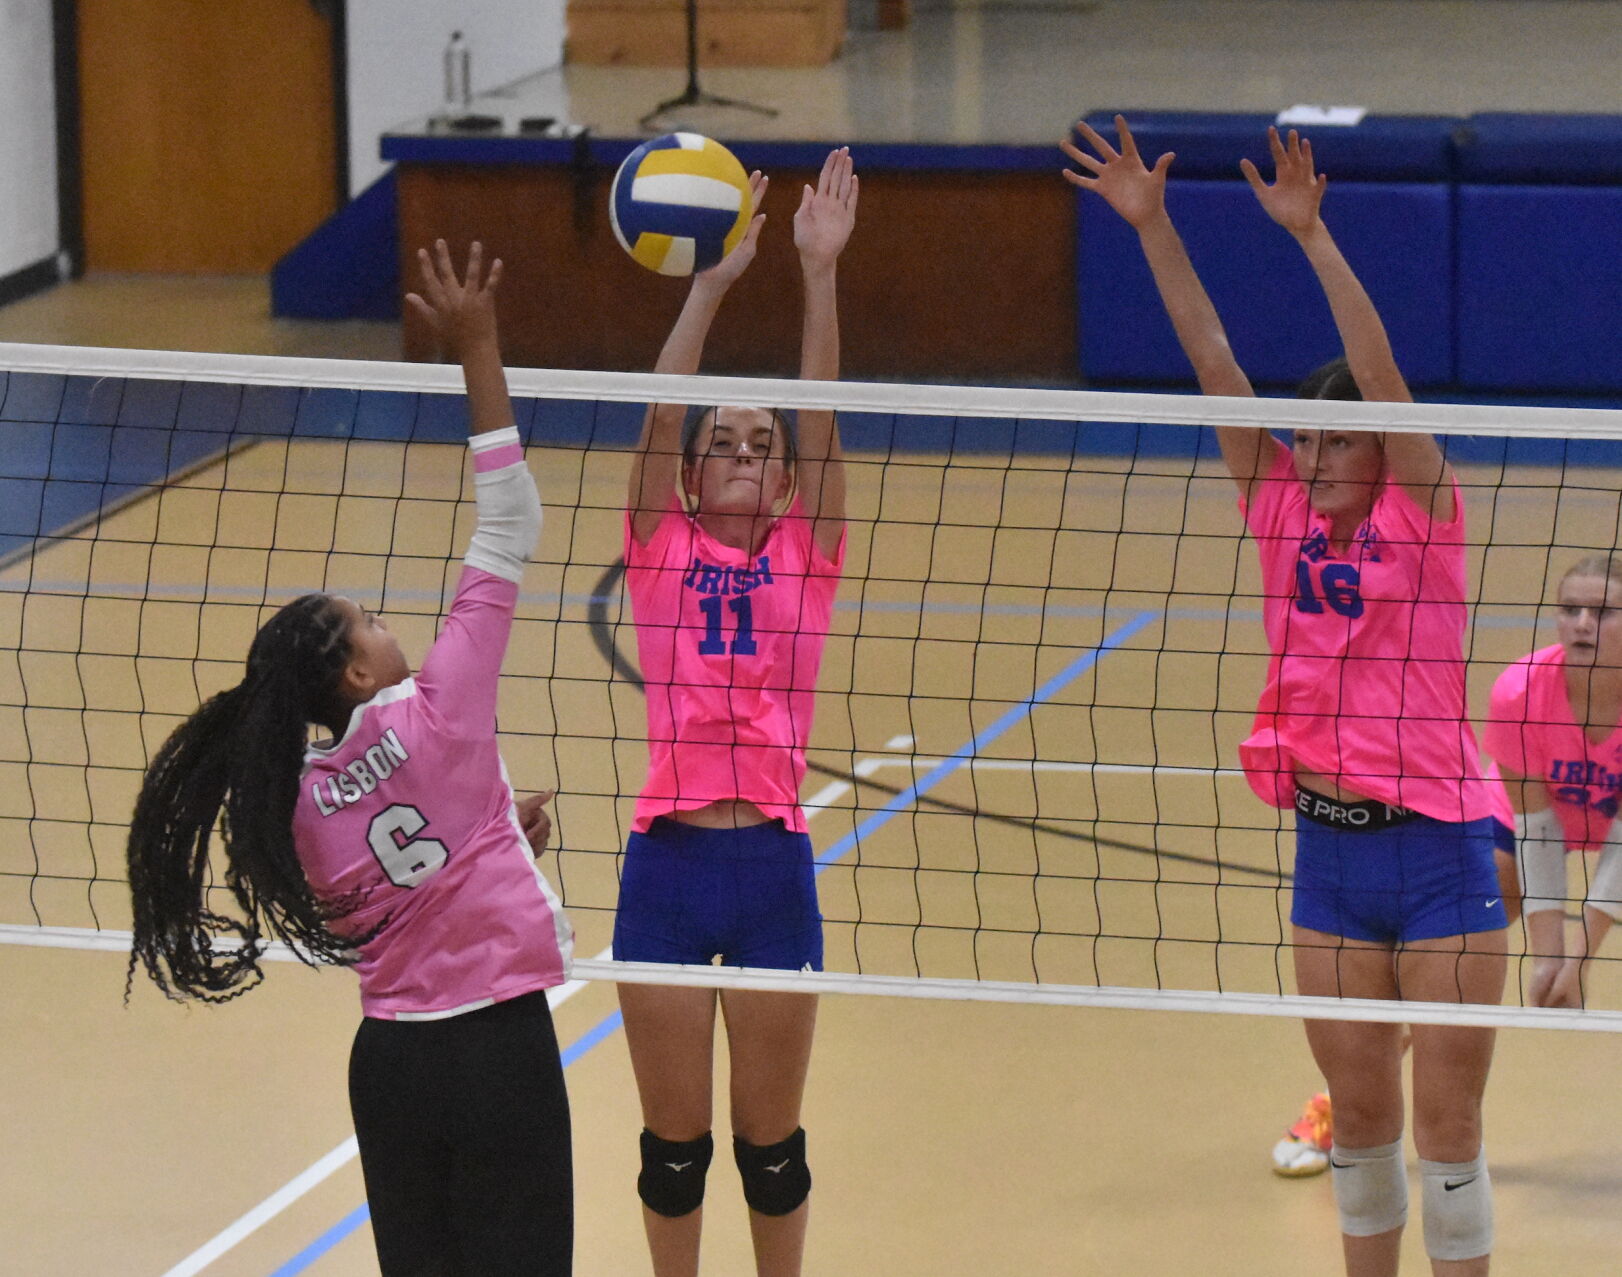 Irish swept by Lisbon in Conference action